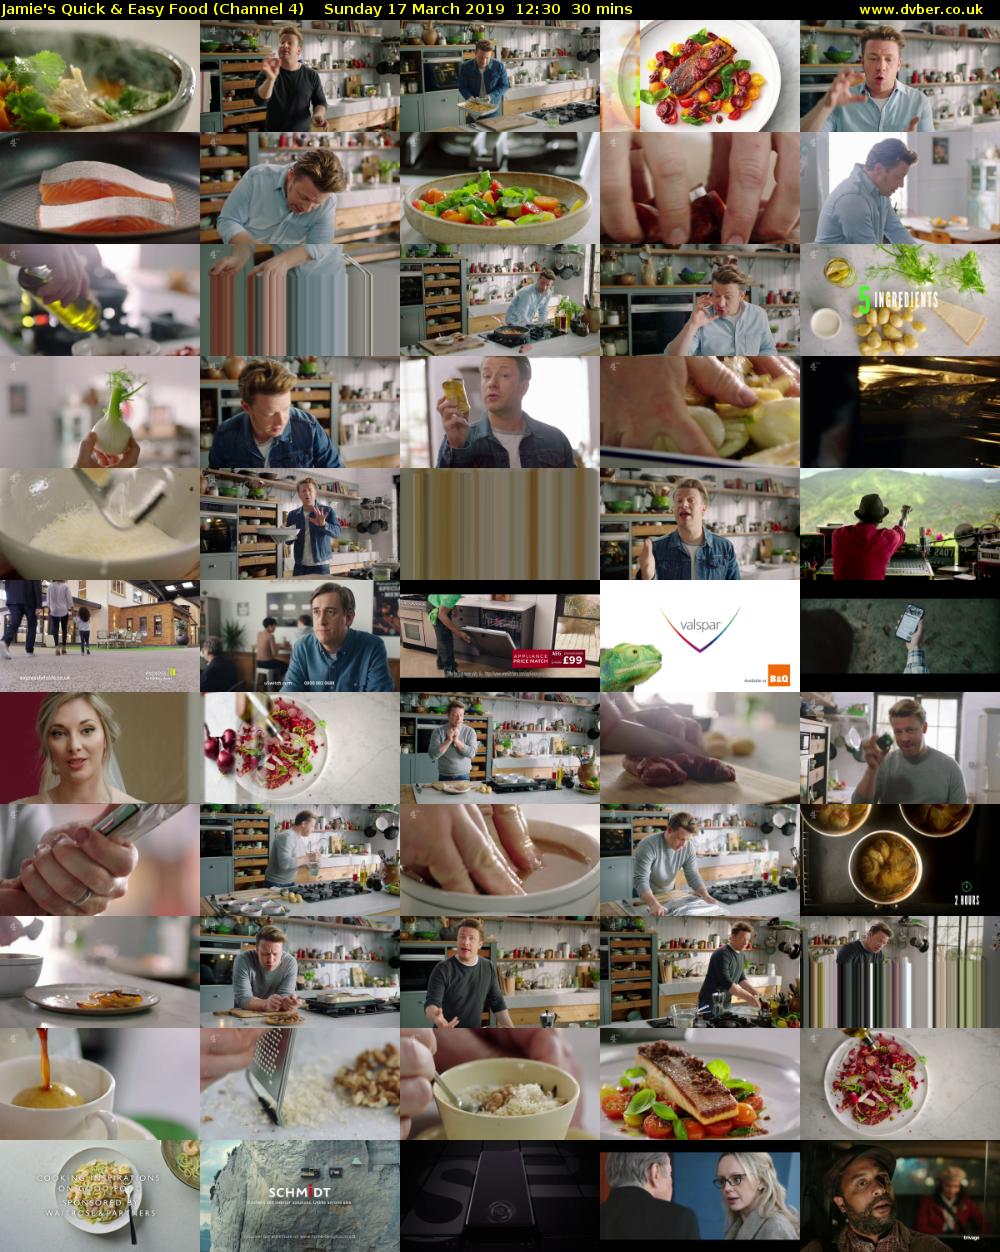 Jamie's Quick & Easy Food (Channel 4) Sunday 17 March 2019 12:30 - 13:00